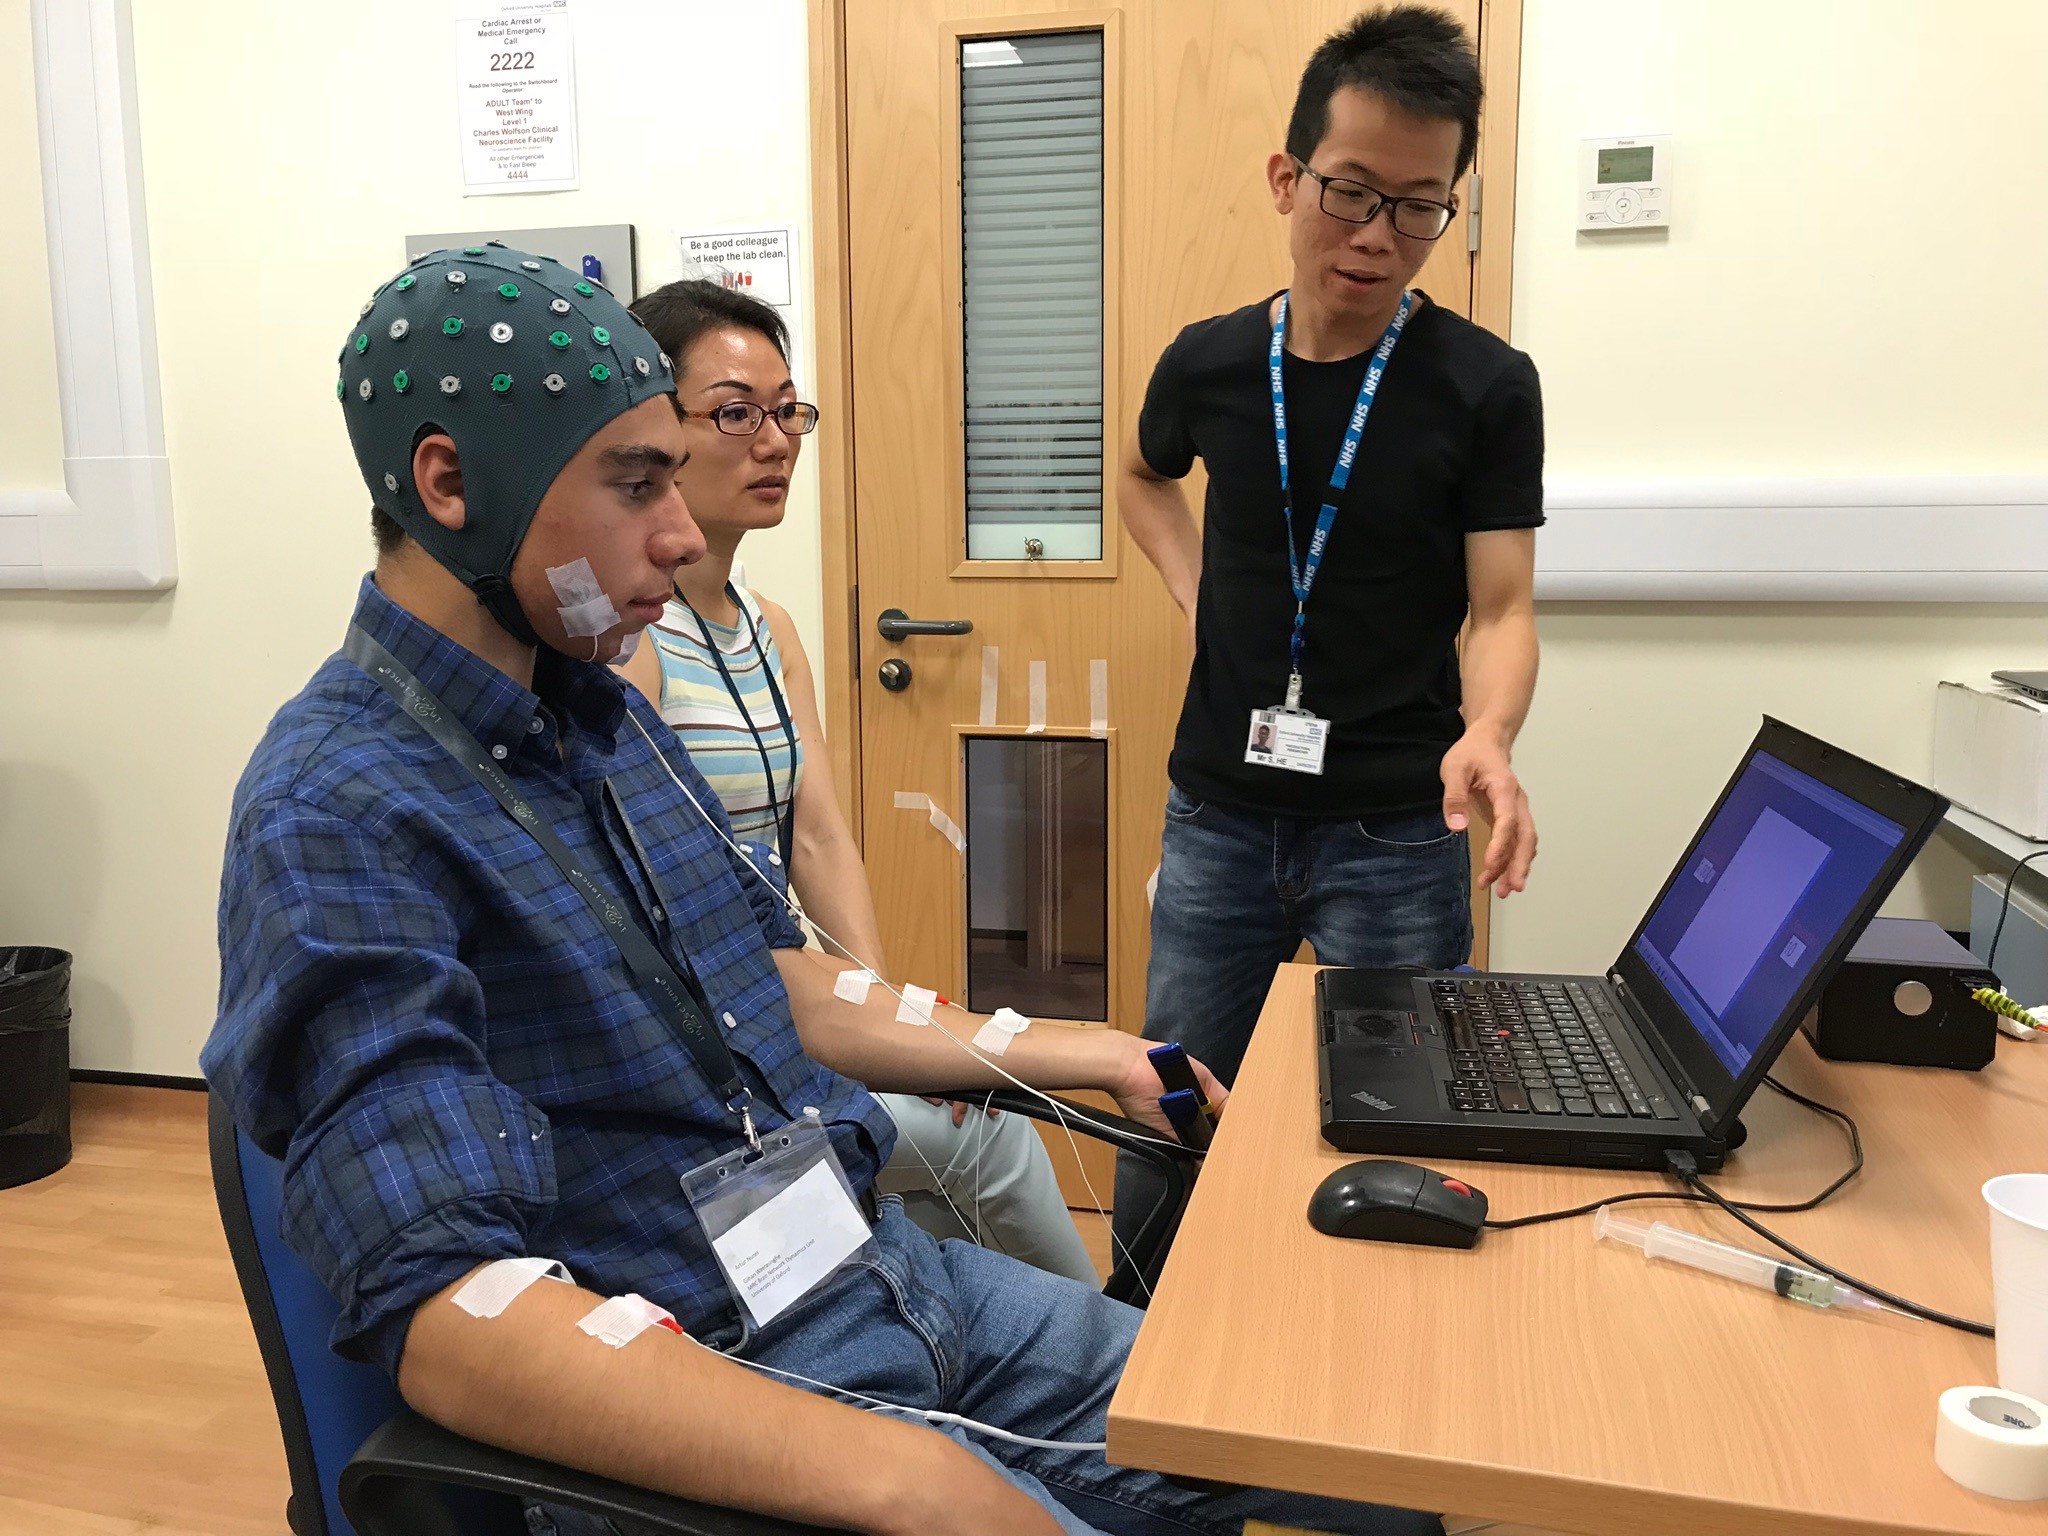 In2scienceUK student Artur records his own brain and muscle activity at the MRC BNDU, guided by Unit scientists Huiling Tan (seated) and Shenghong He.